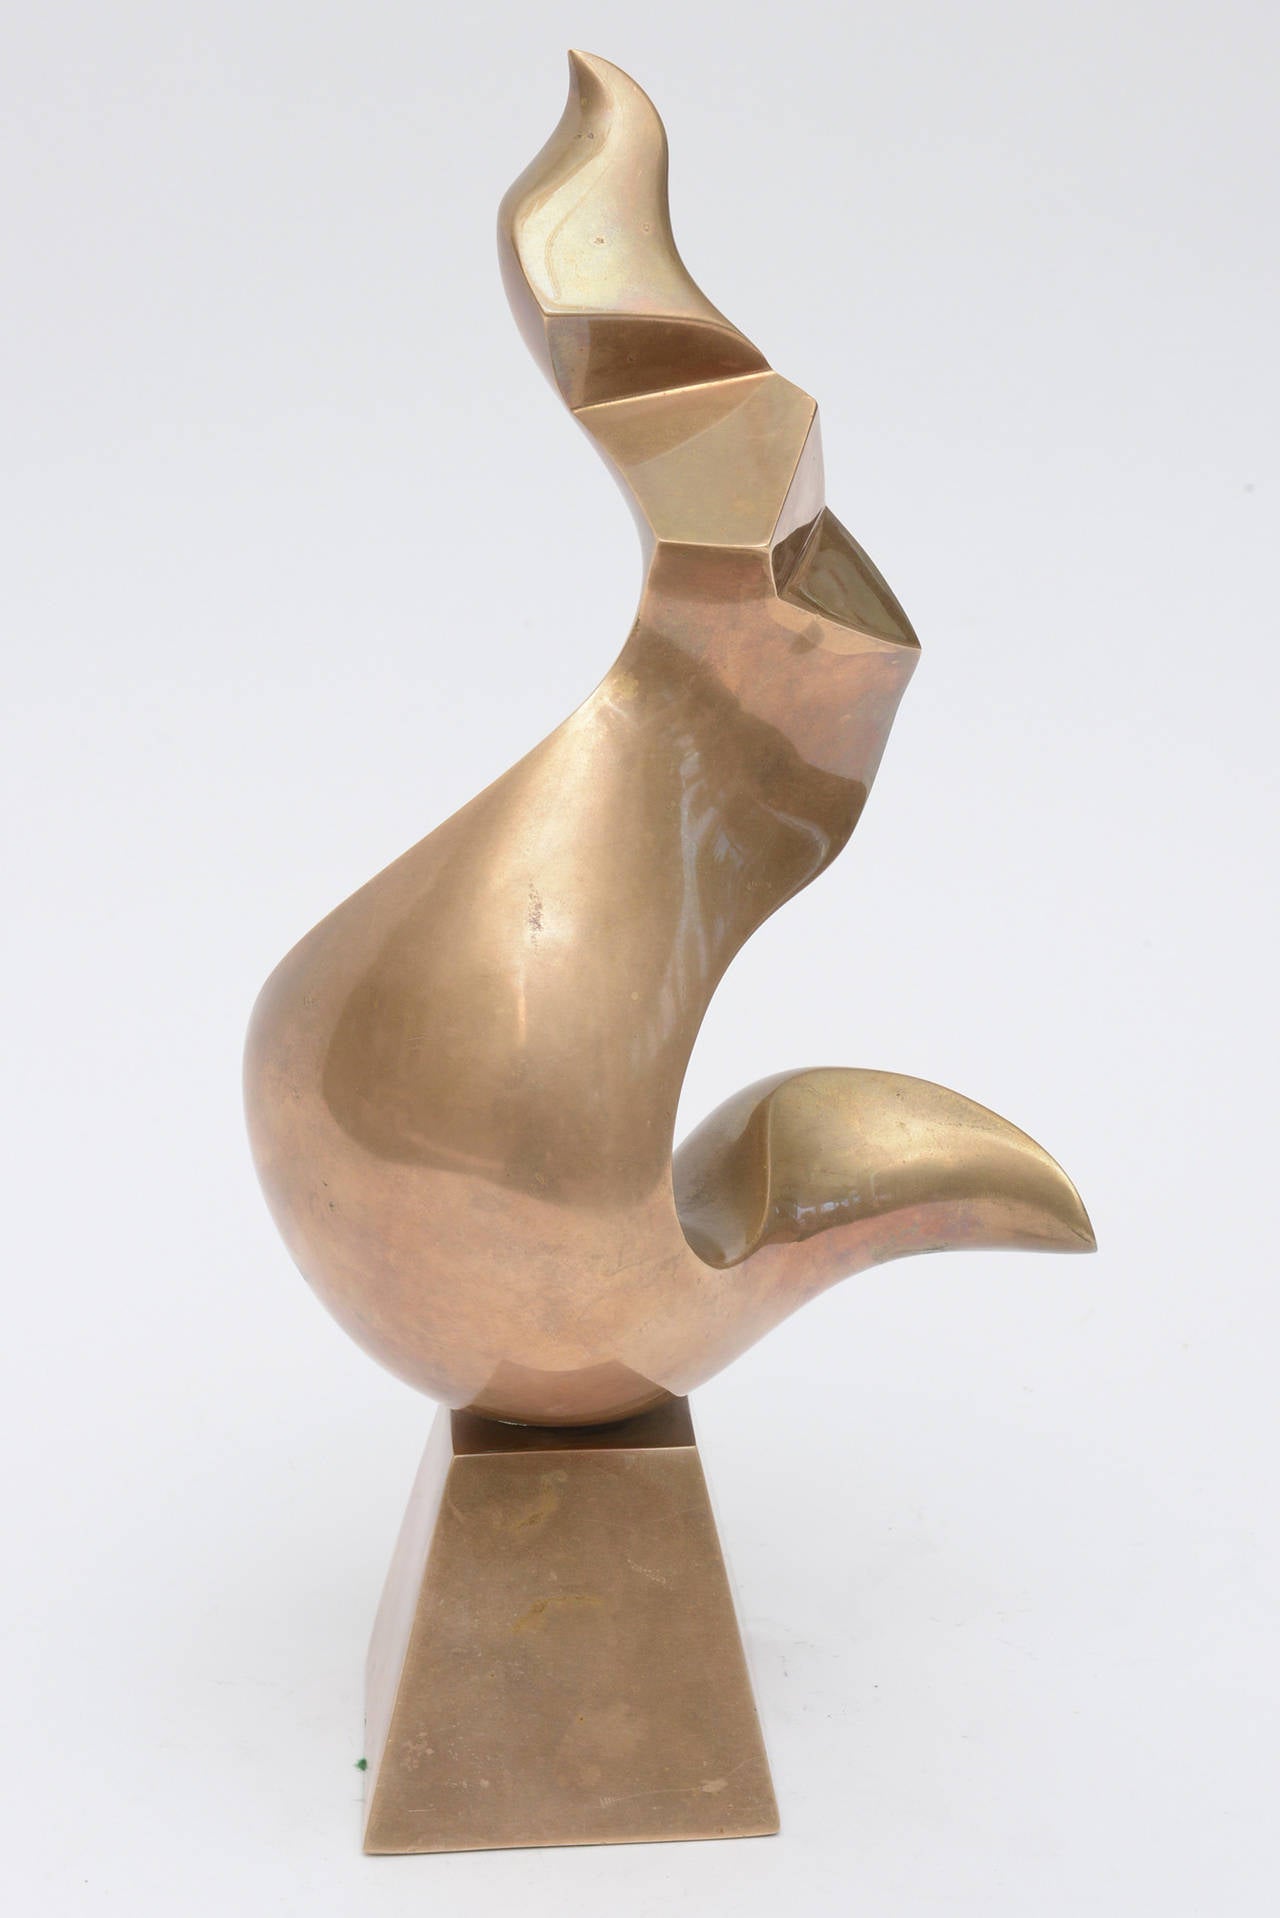 This sensual and amazing small edition bronze sculpture is by the noted and prolific Canadian sculptor: Antonio Grediaga Kieff. It is abstract and changes forms with every angle turn. It is 7/9 as the edition size. It is fabulous! From the 1980s.